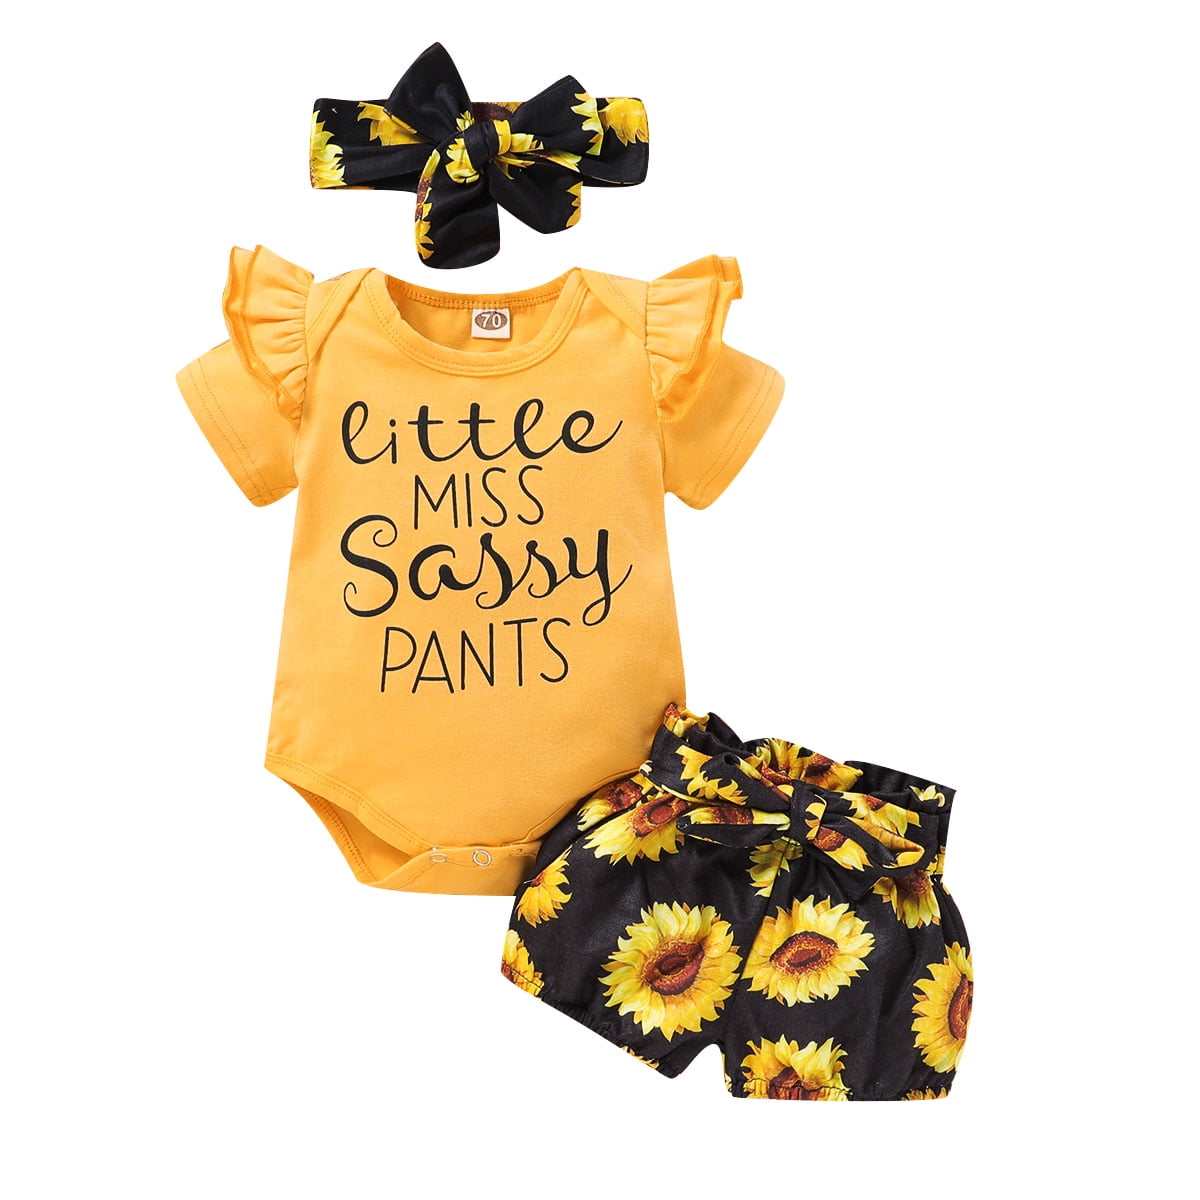 Newborn Baby Girl Clothes Infant Romper Onesies Ruffle Floral Shorts Toddler Baby Girls Clothing Outfits